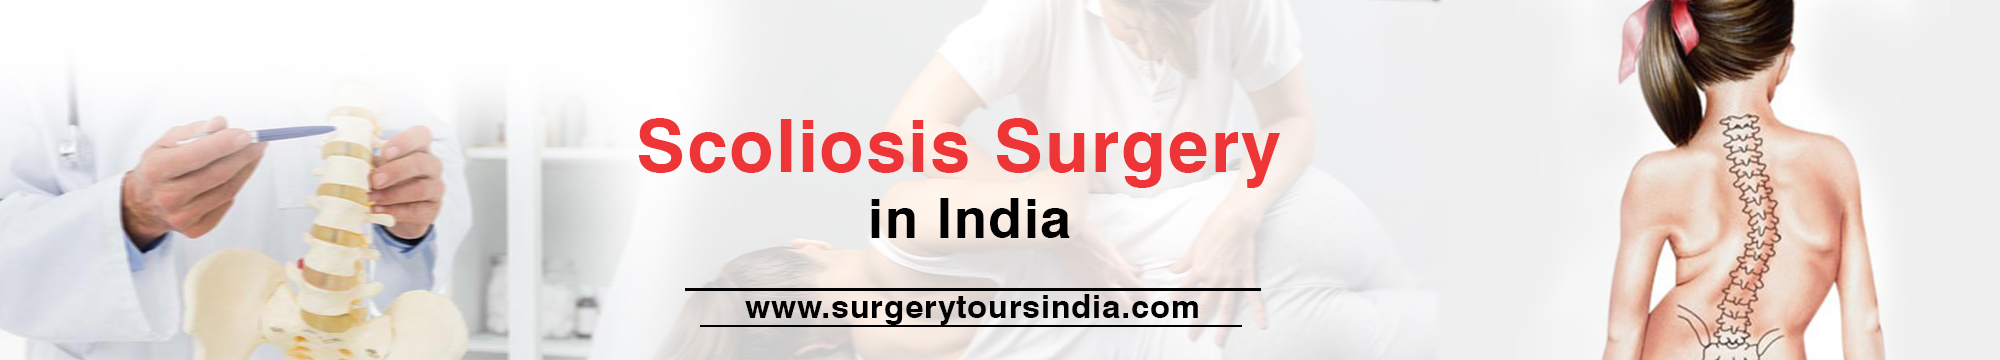 Scoliosis surgery in India